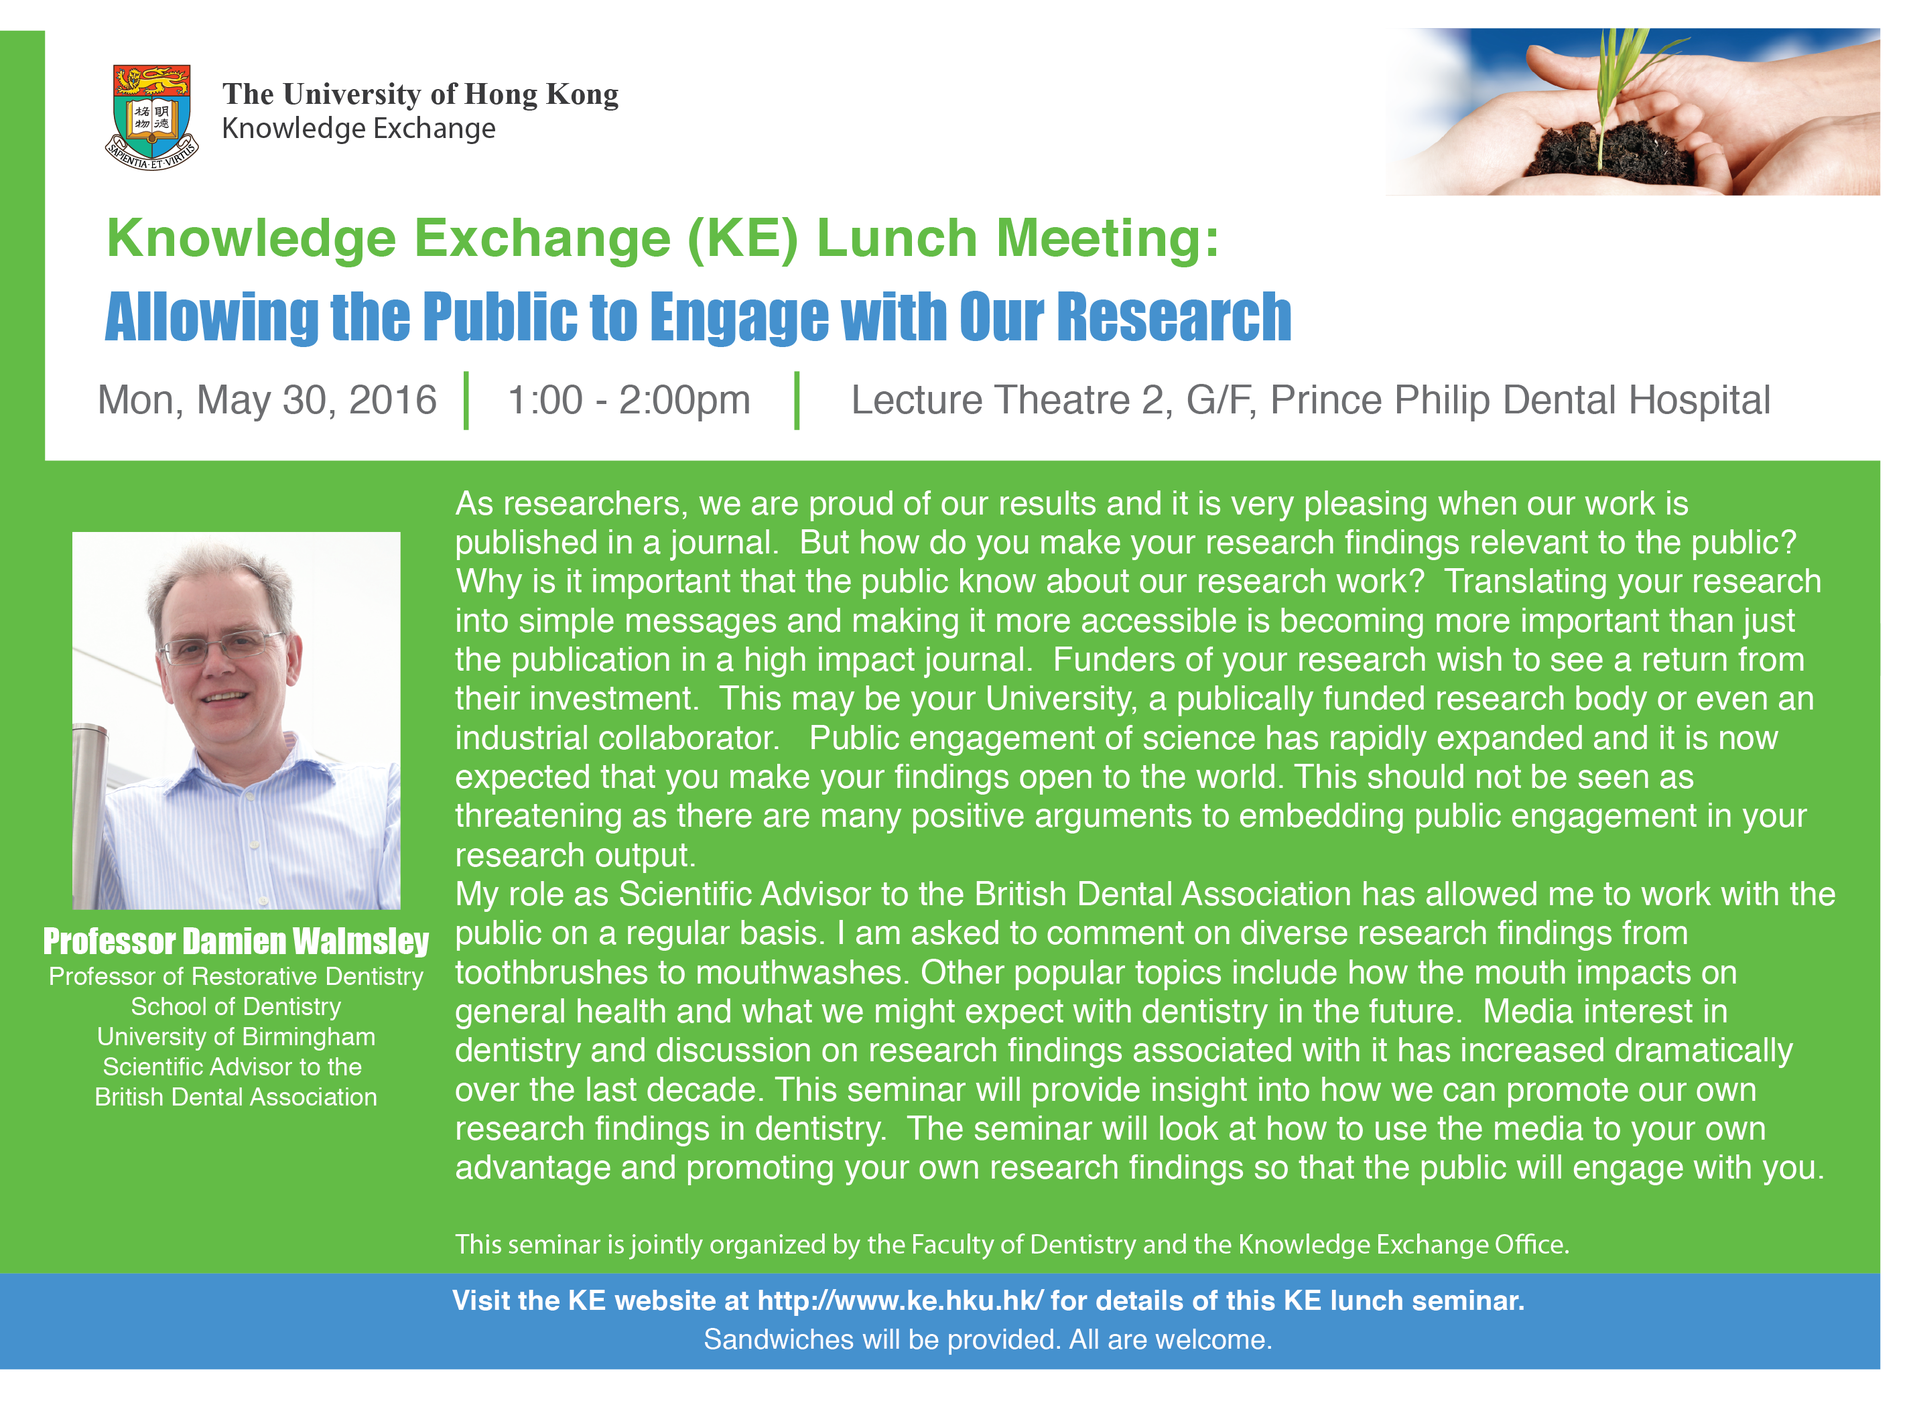 KE Lunch: Allowing the Public to Engage with Our Research